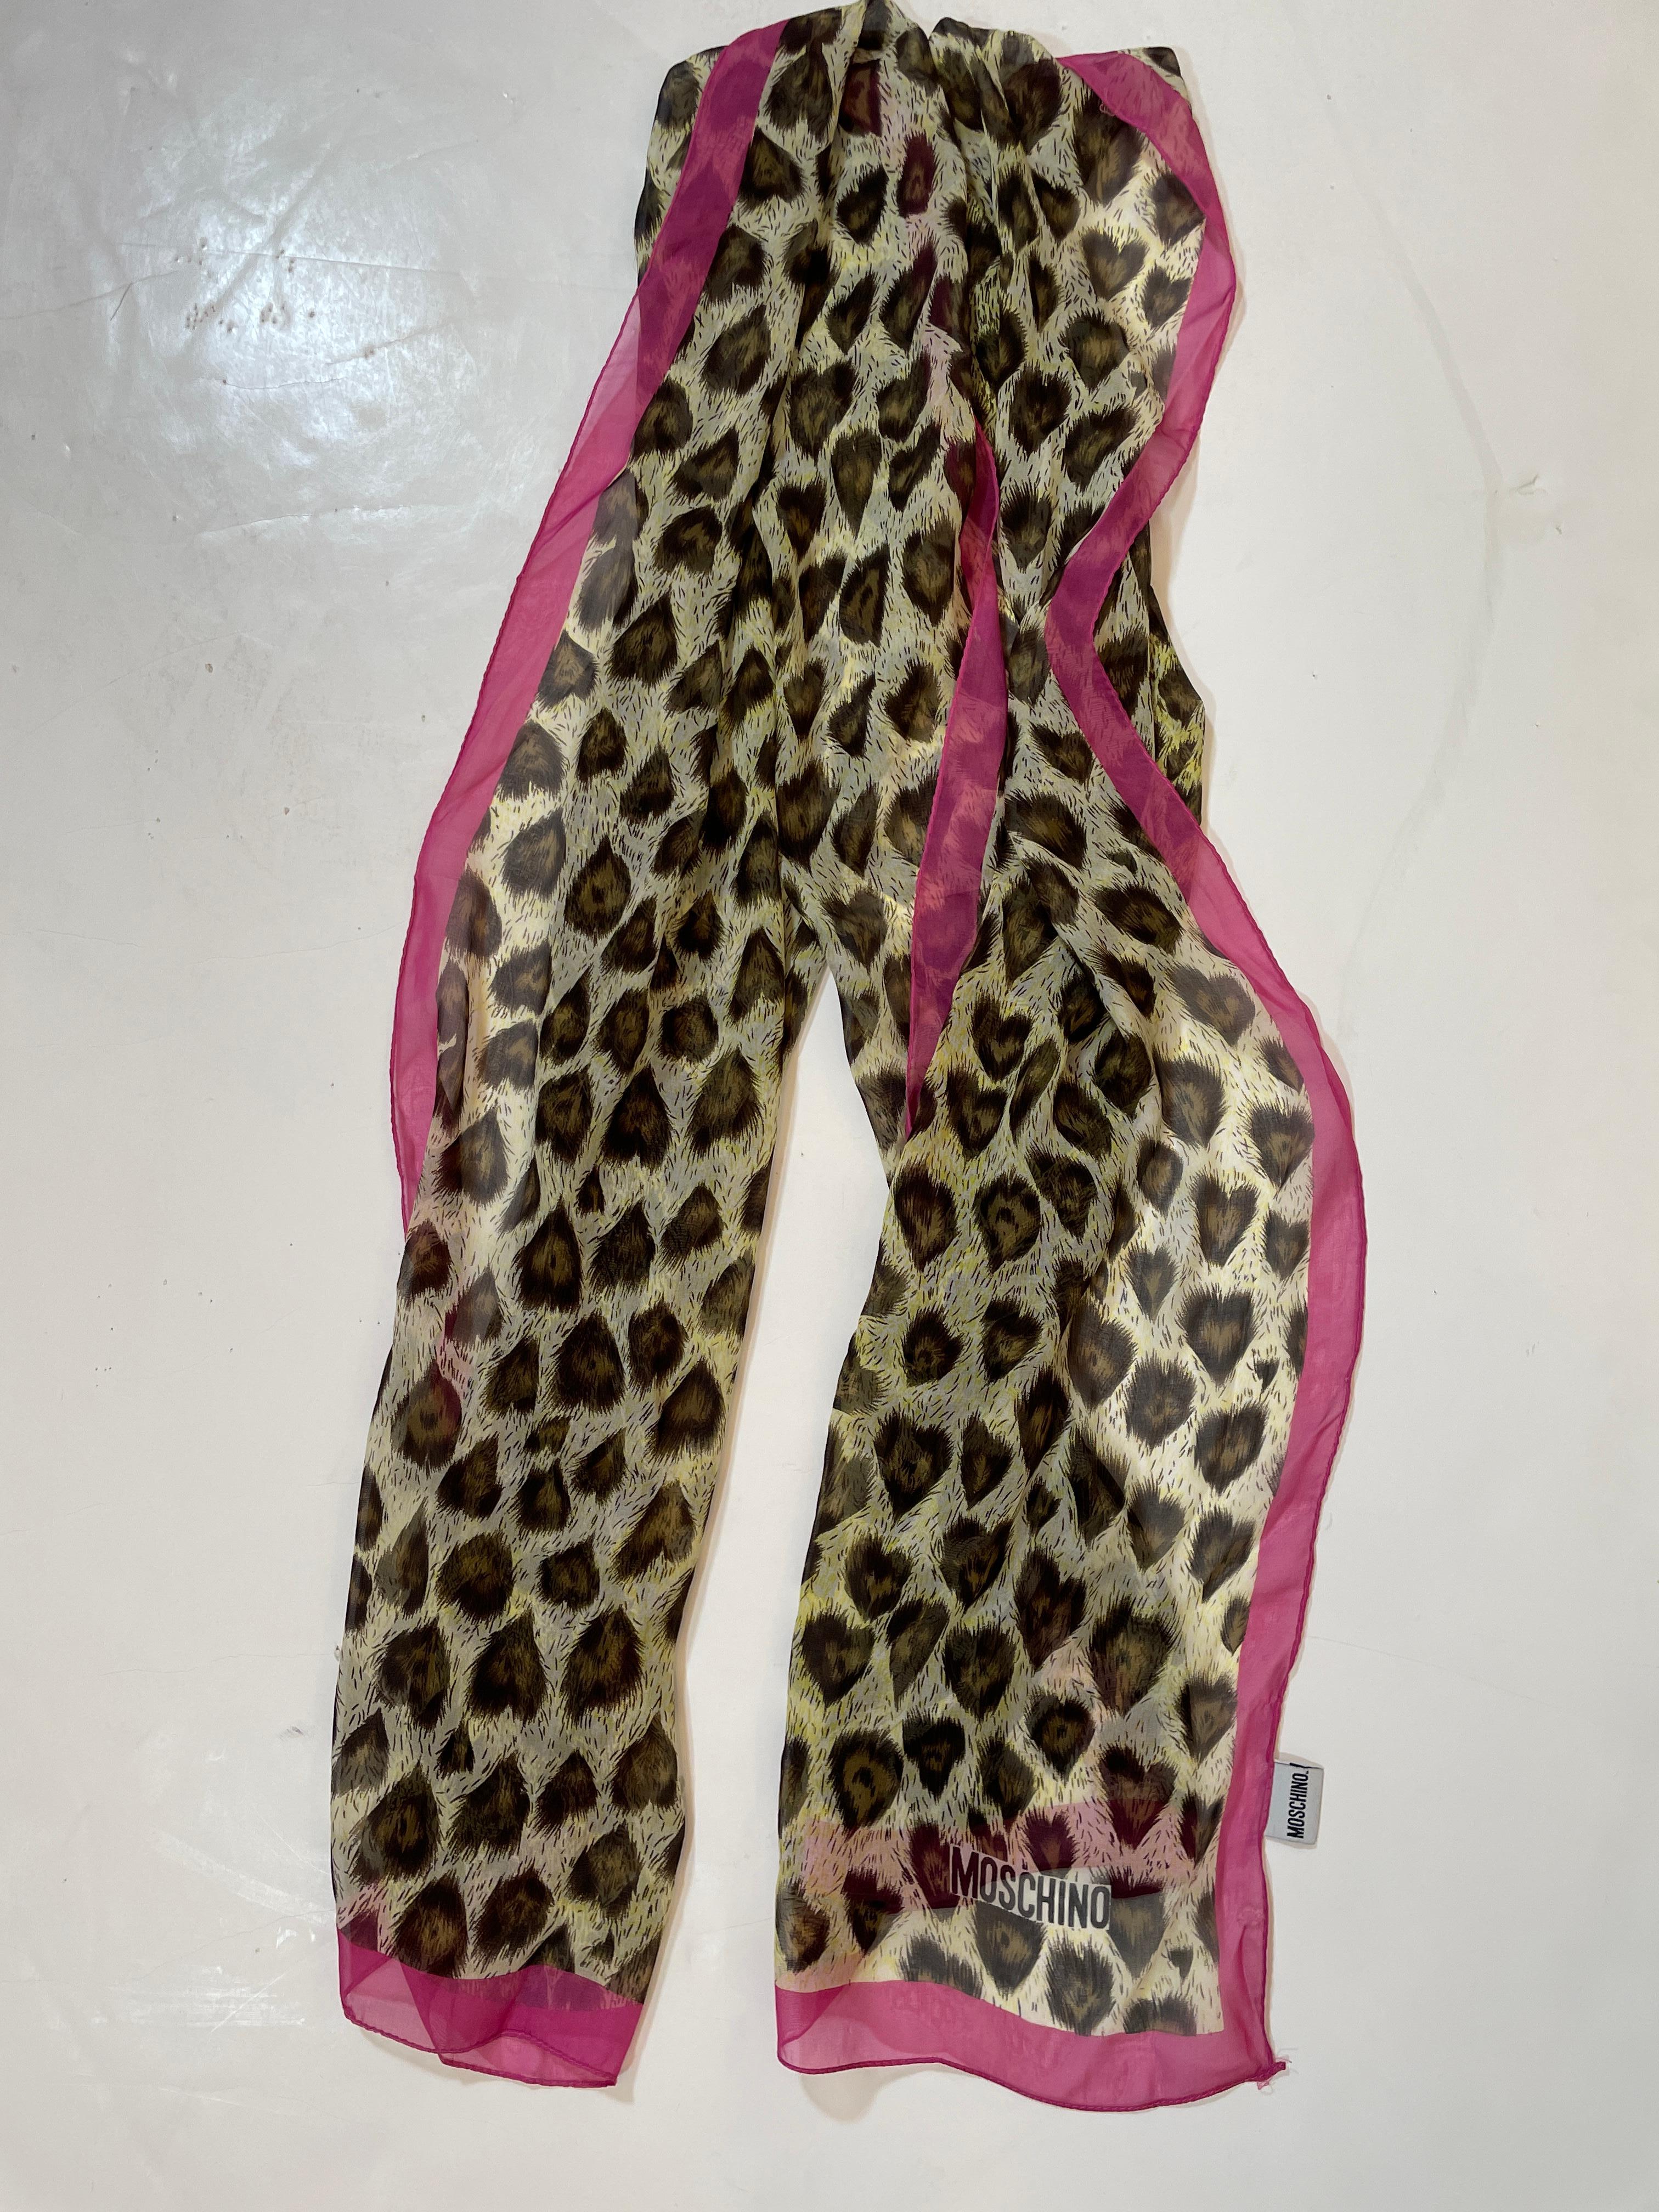 Moschino Milano Animal Print Silk Chiffon Scarf Made In Italy Pink And Brown 1990s.
Womens fuchsia hot pink with brown leopard or peacock feather print silk scarf or head wrap, belt or hair tie.
 Vintage exquisite long scarf made in Italy.
A perfect